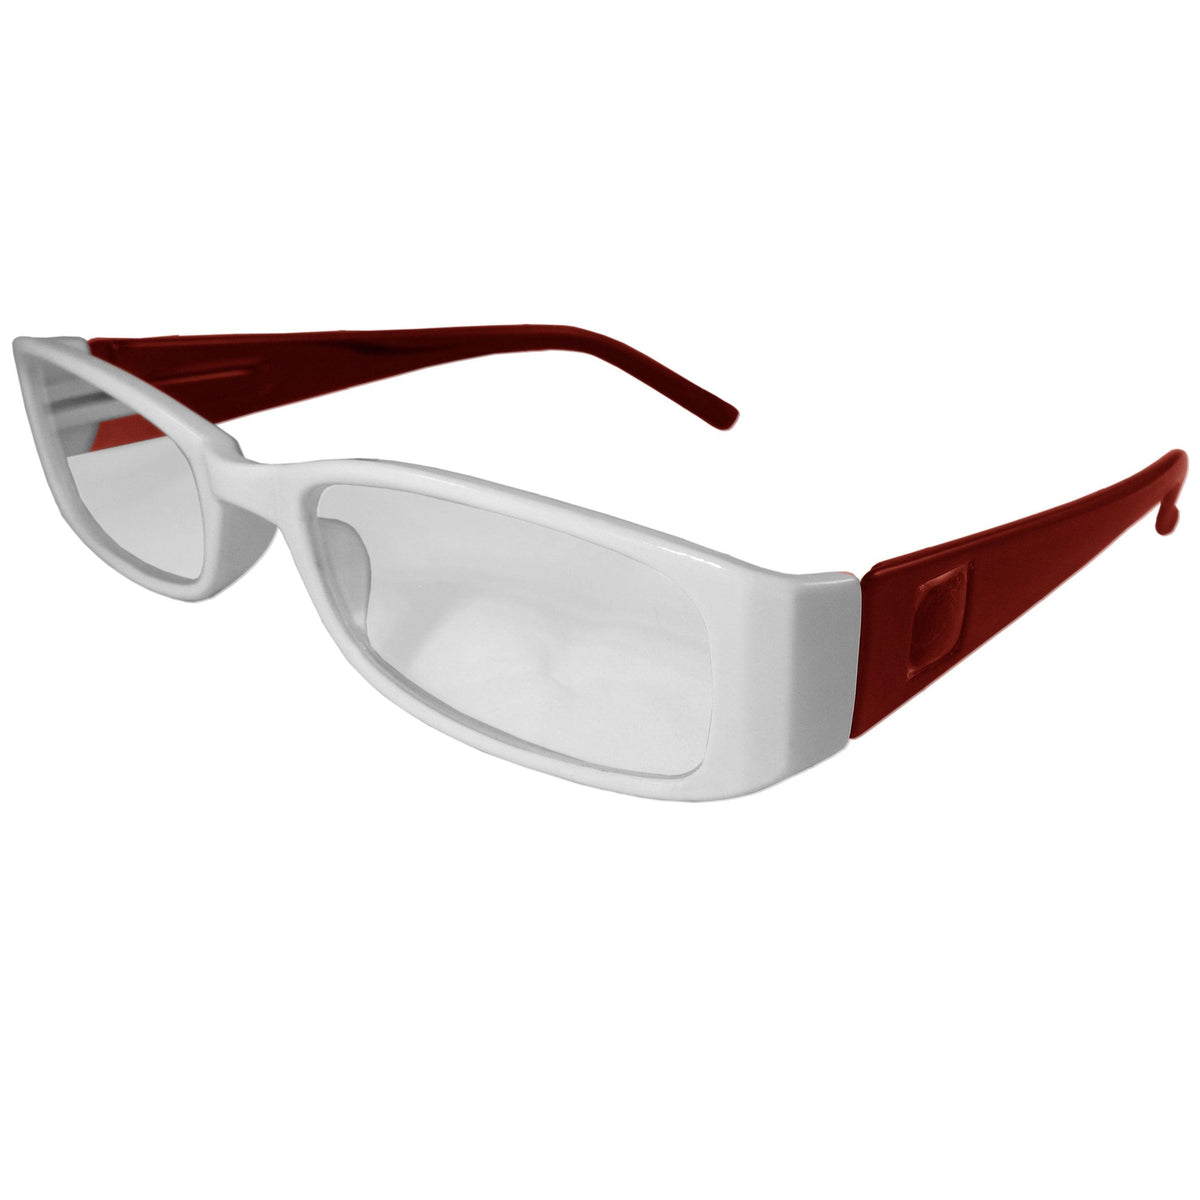 White and Red Reading Glasses Power +1.50, 3 pack - Flyclothing LLC